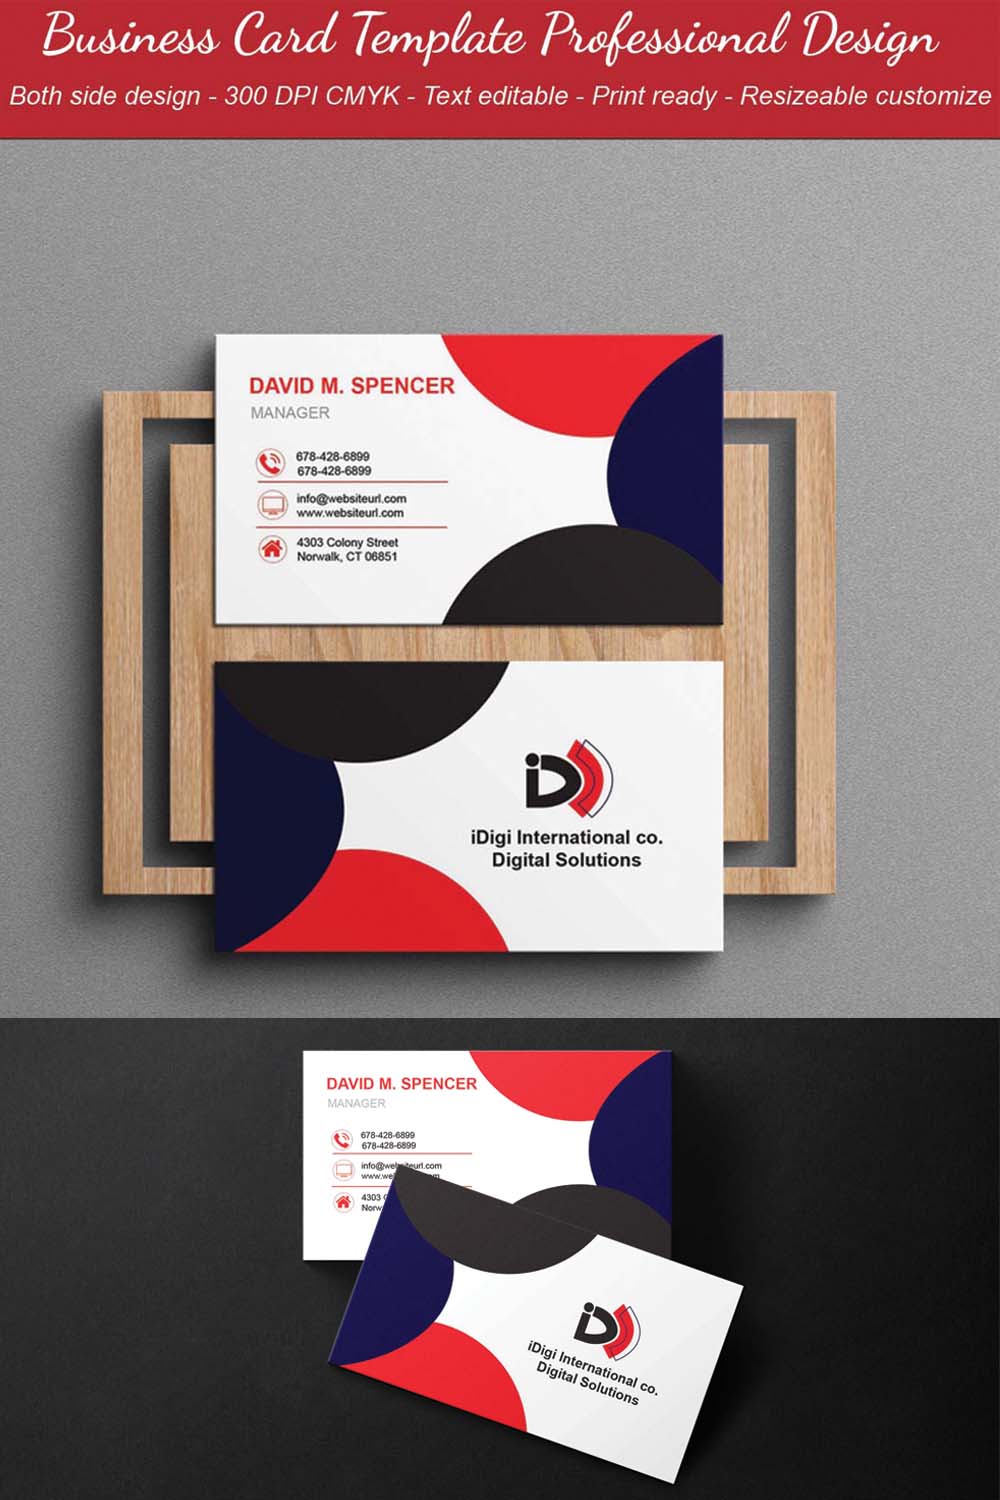 Red Creative Business Card Template Pinterest Collage image.